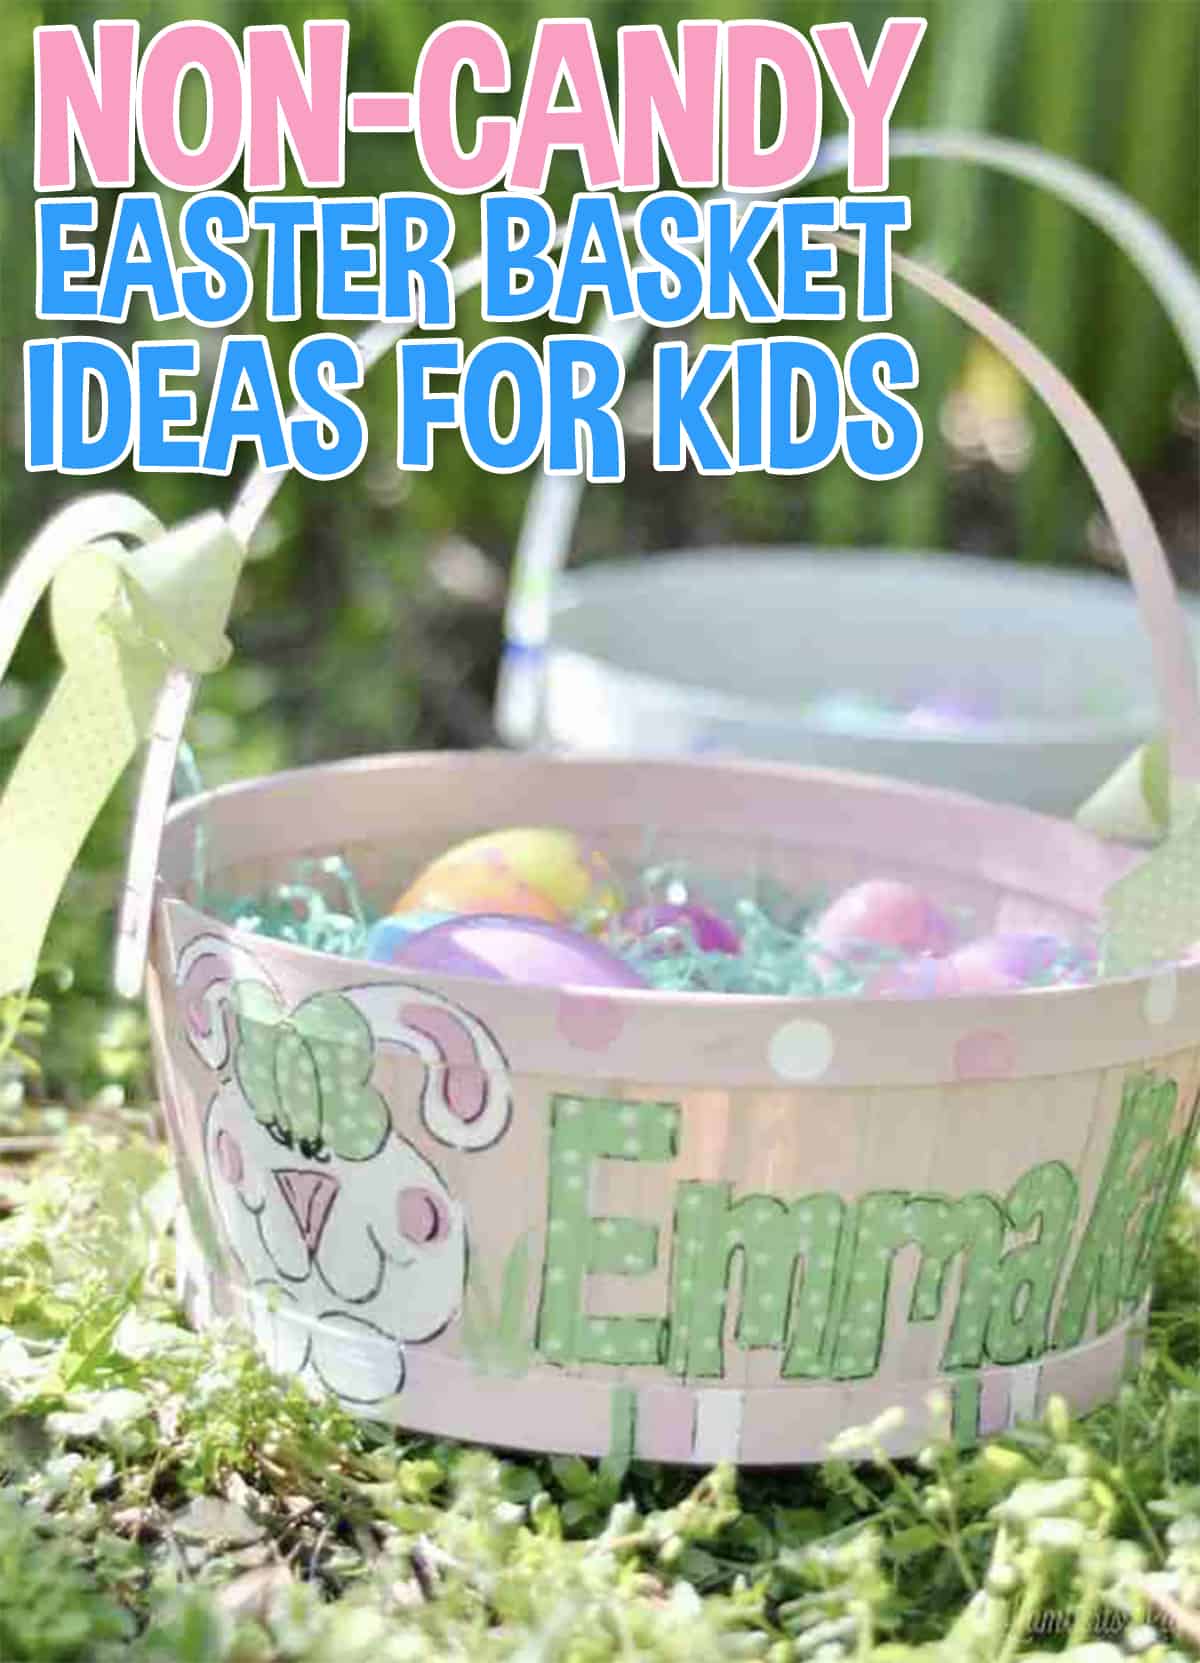 non-candy easter basket ideas for kids.